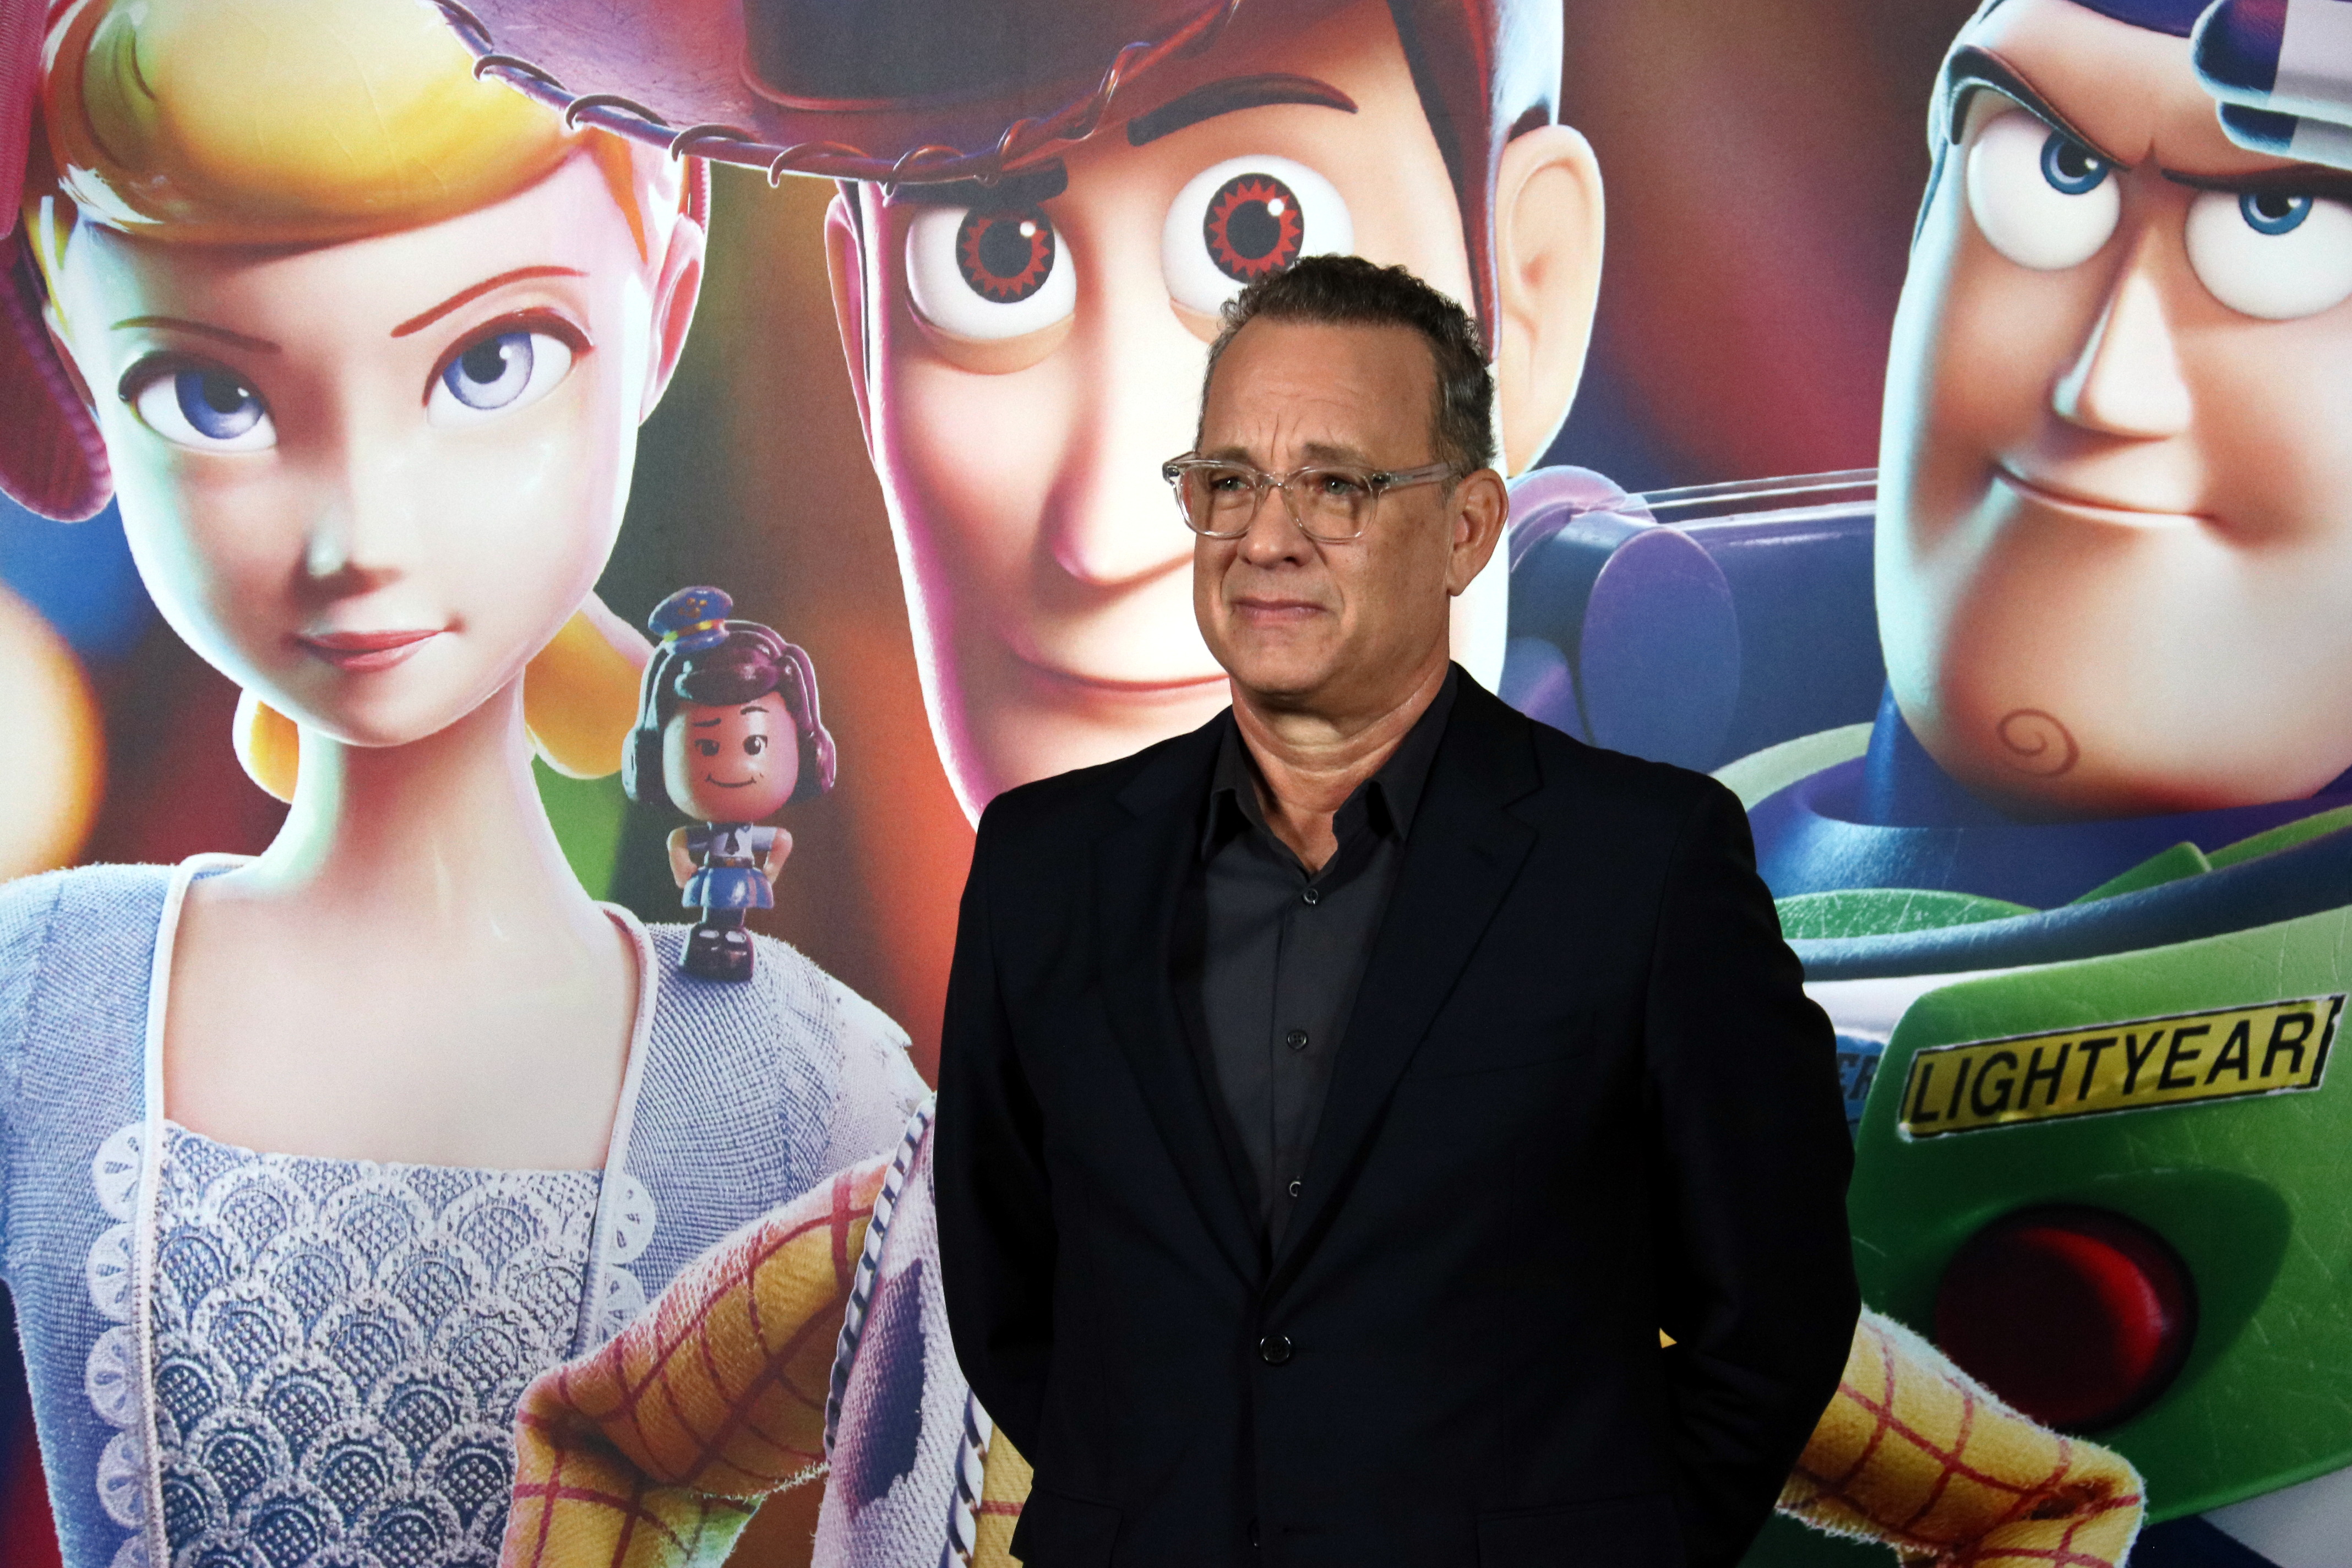 Tom Hanks presenting Toy Story 4 in Barcelona on June 19, 2019 (Getty)